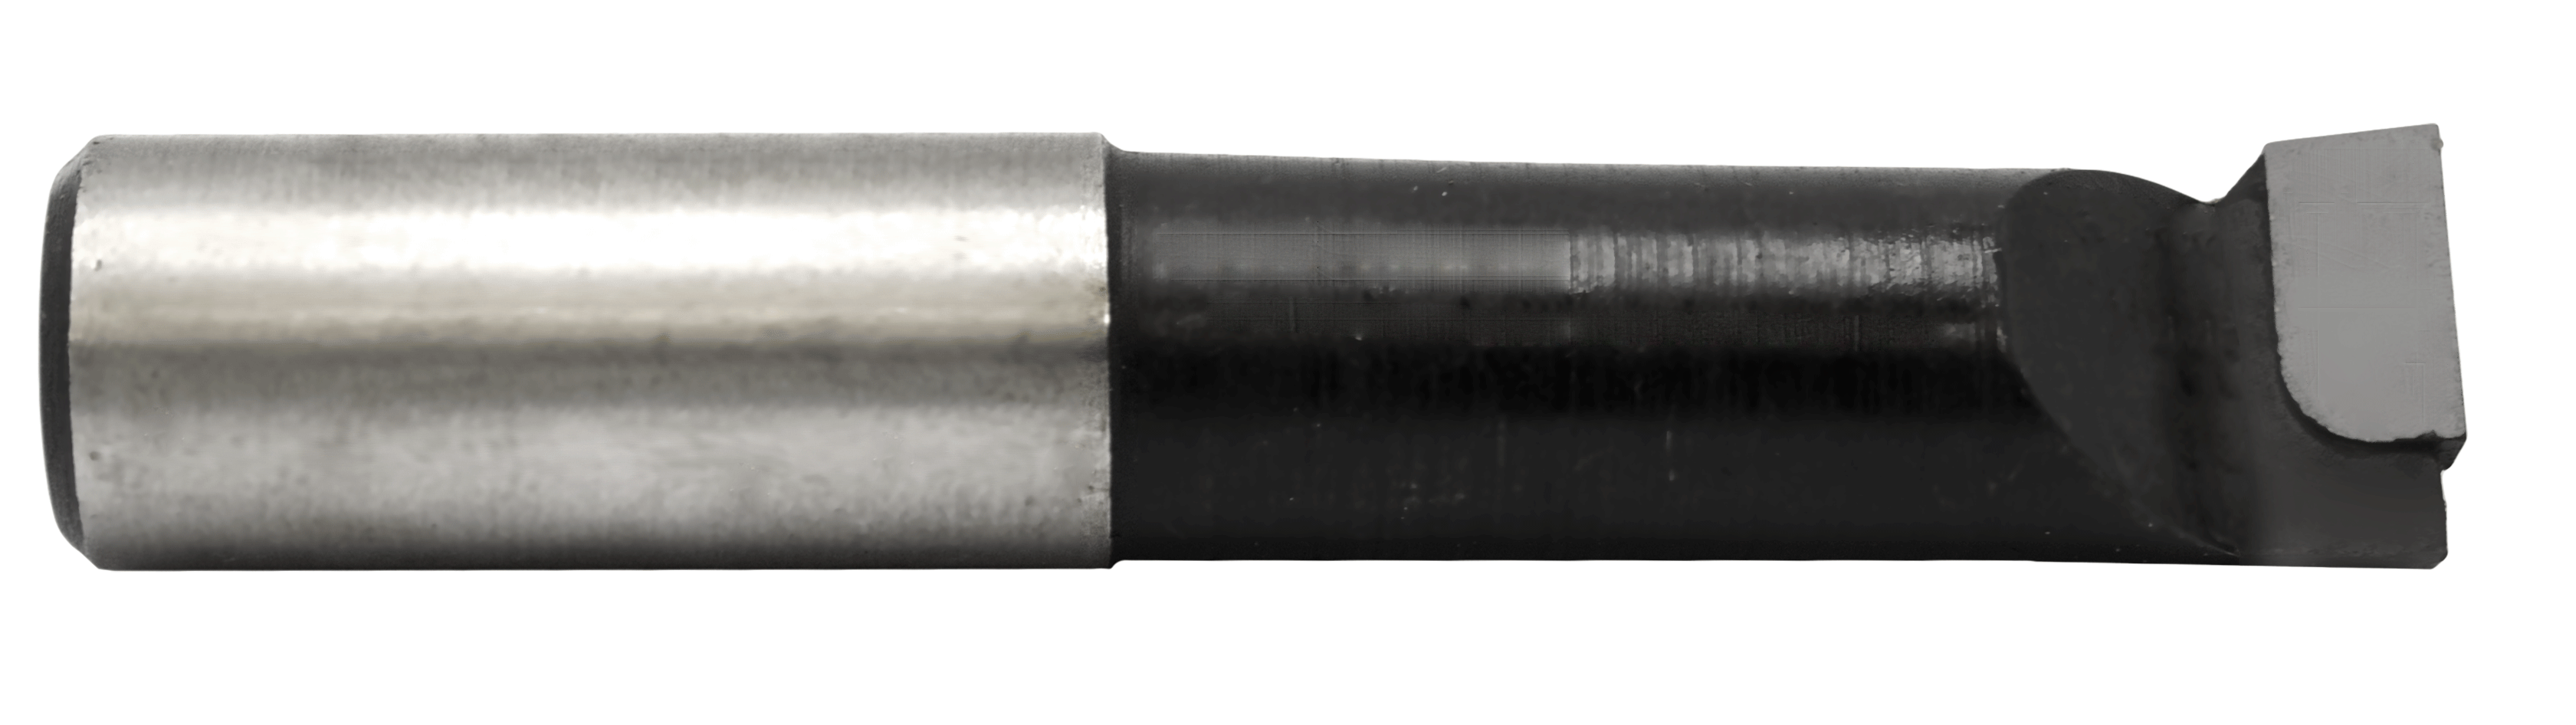 Super-Bore 5/8" C-6 for Steel Applications